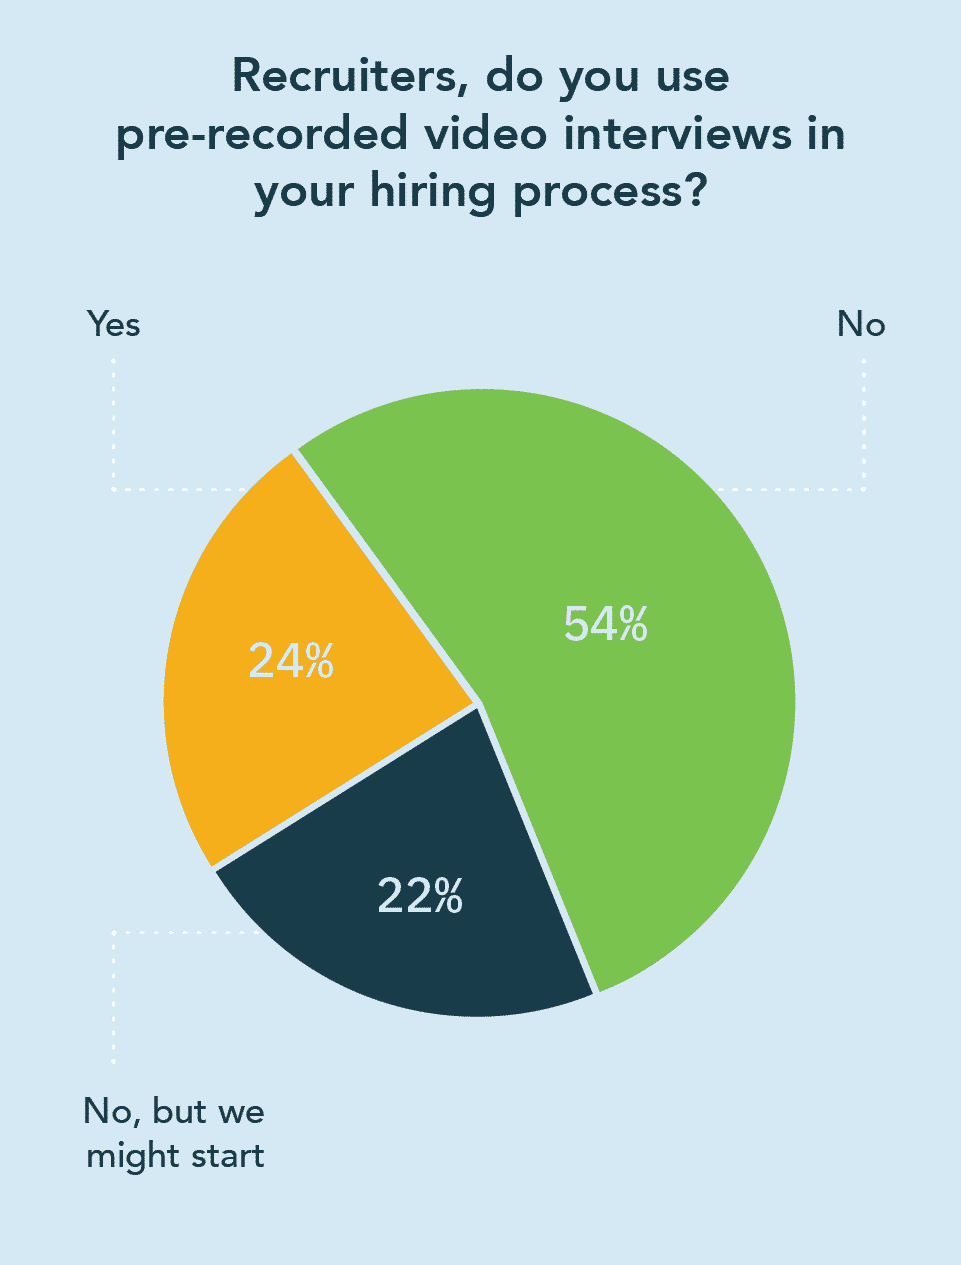 A pie chart showing 54% of recruiters do not use pre-recorded video interviews in their hiring processes, but 22% are thinking about starting